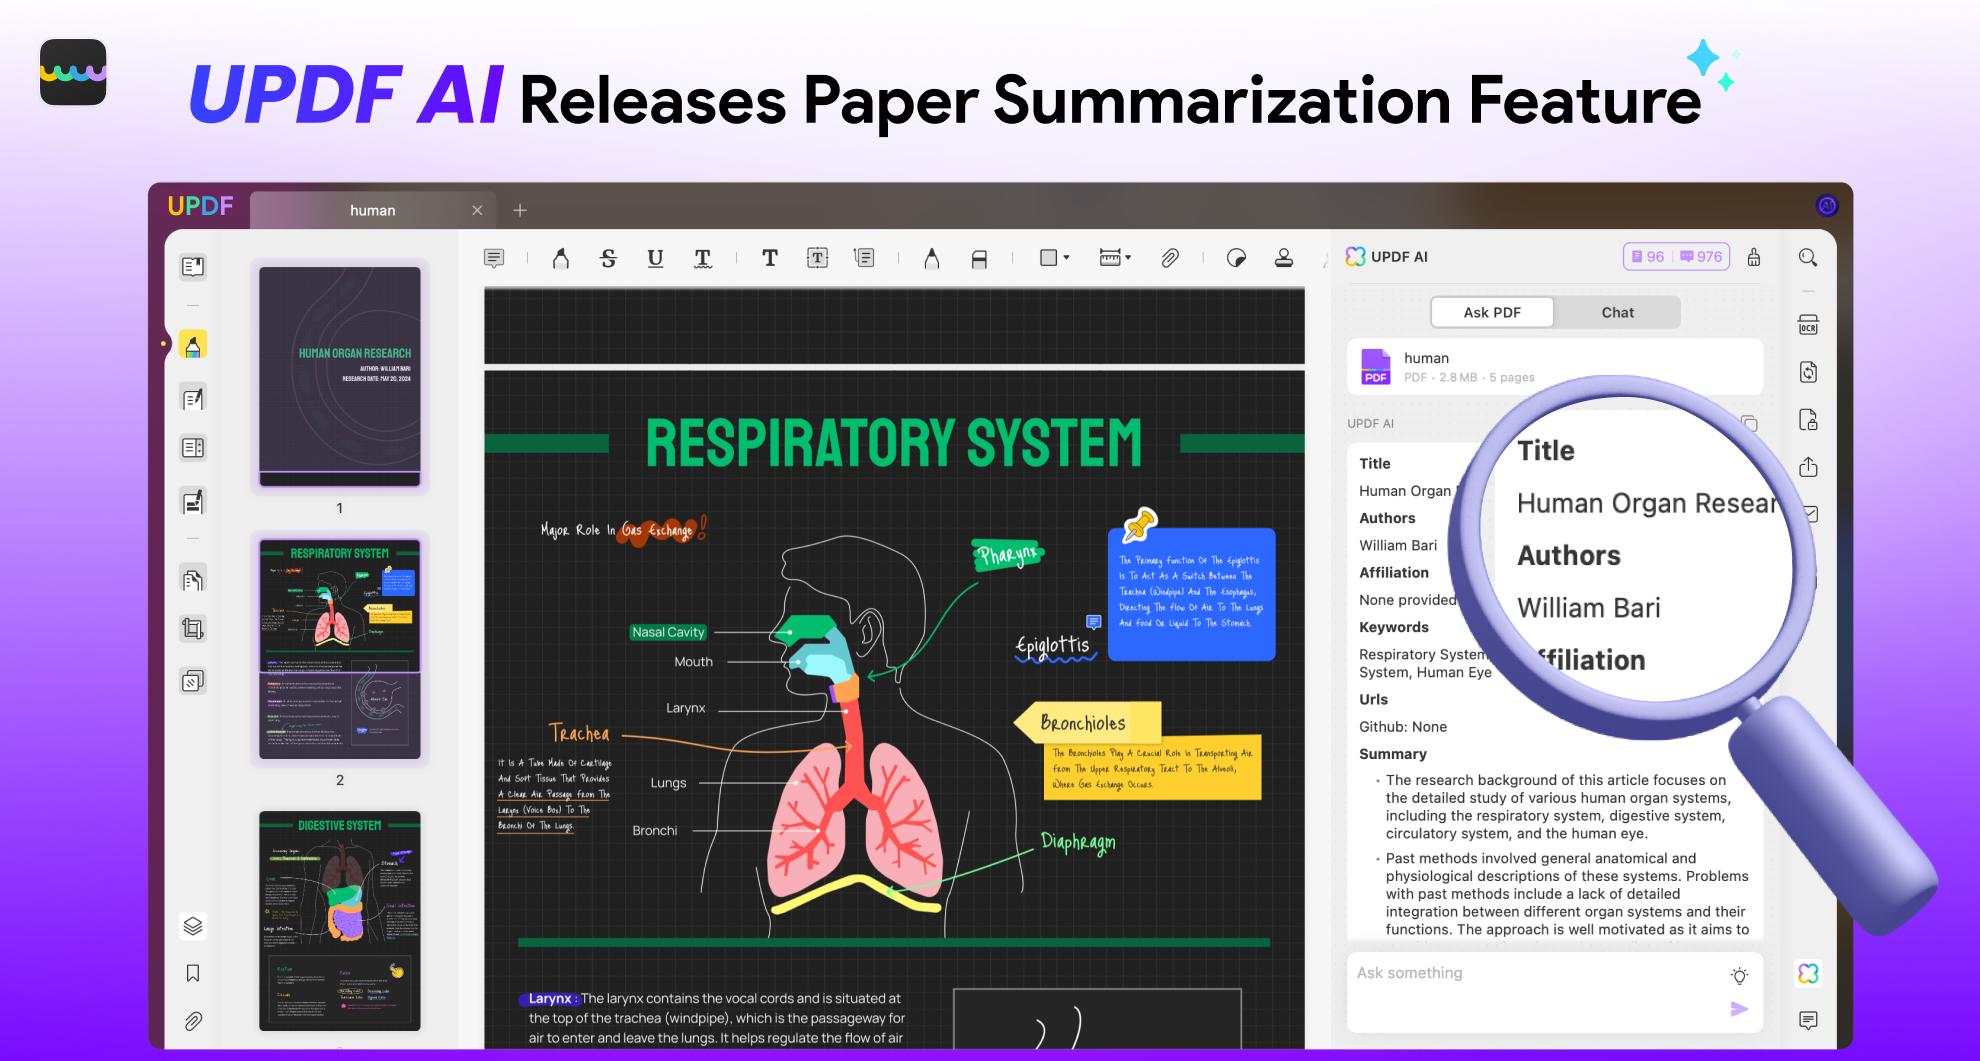 UPDF AI Releases Paper Summarization Feature to Enhance Your Knowledge with AI